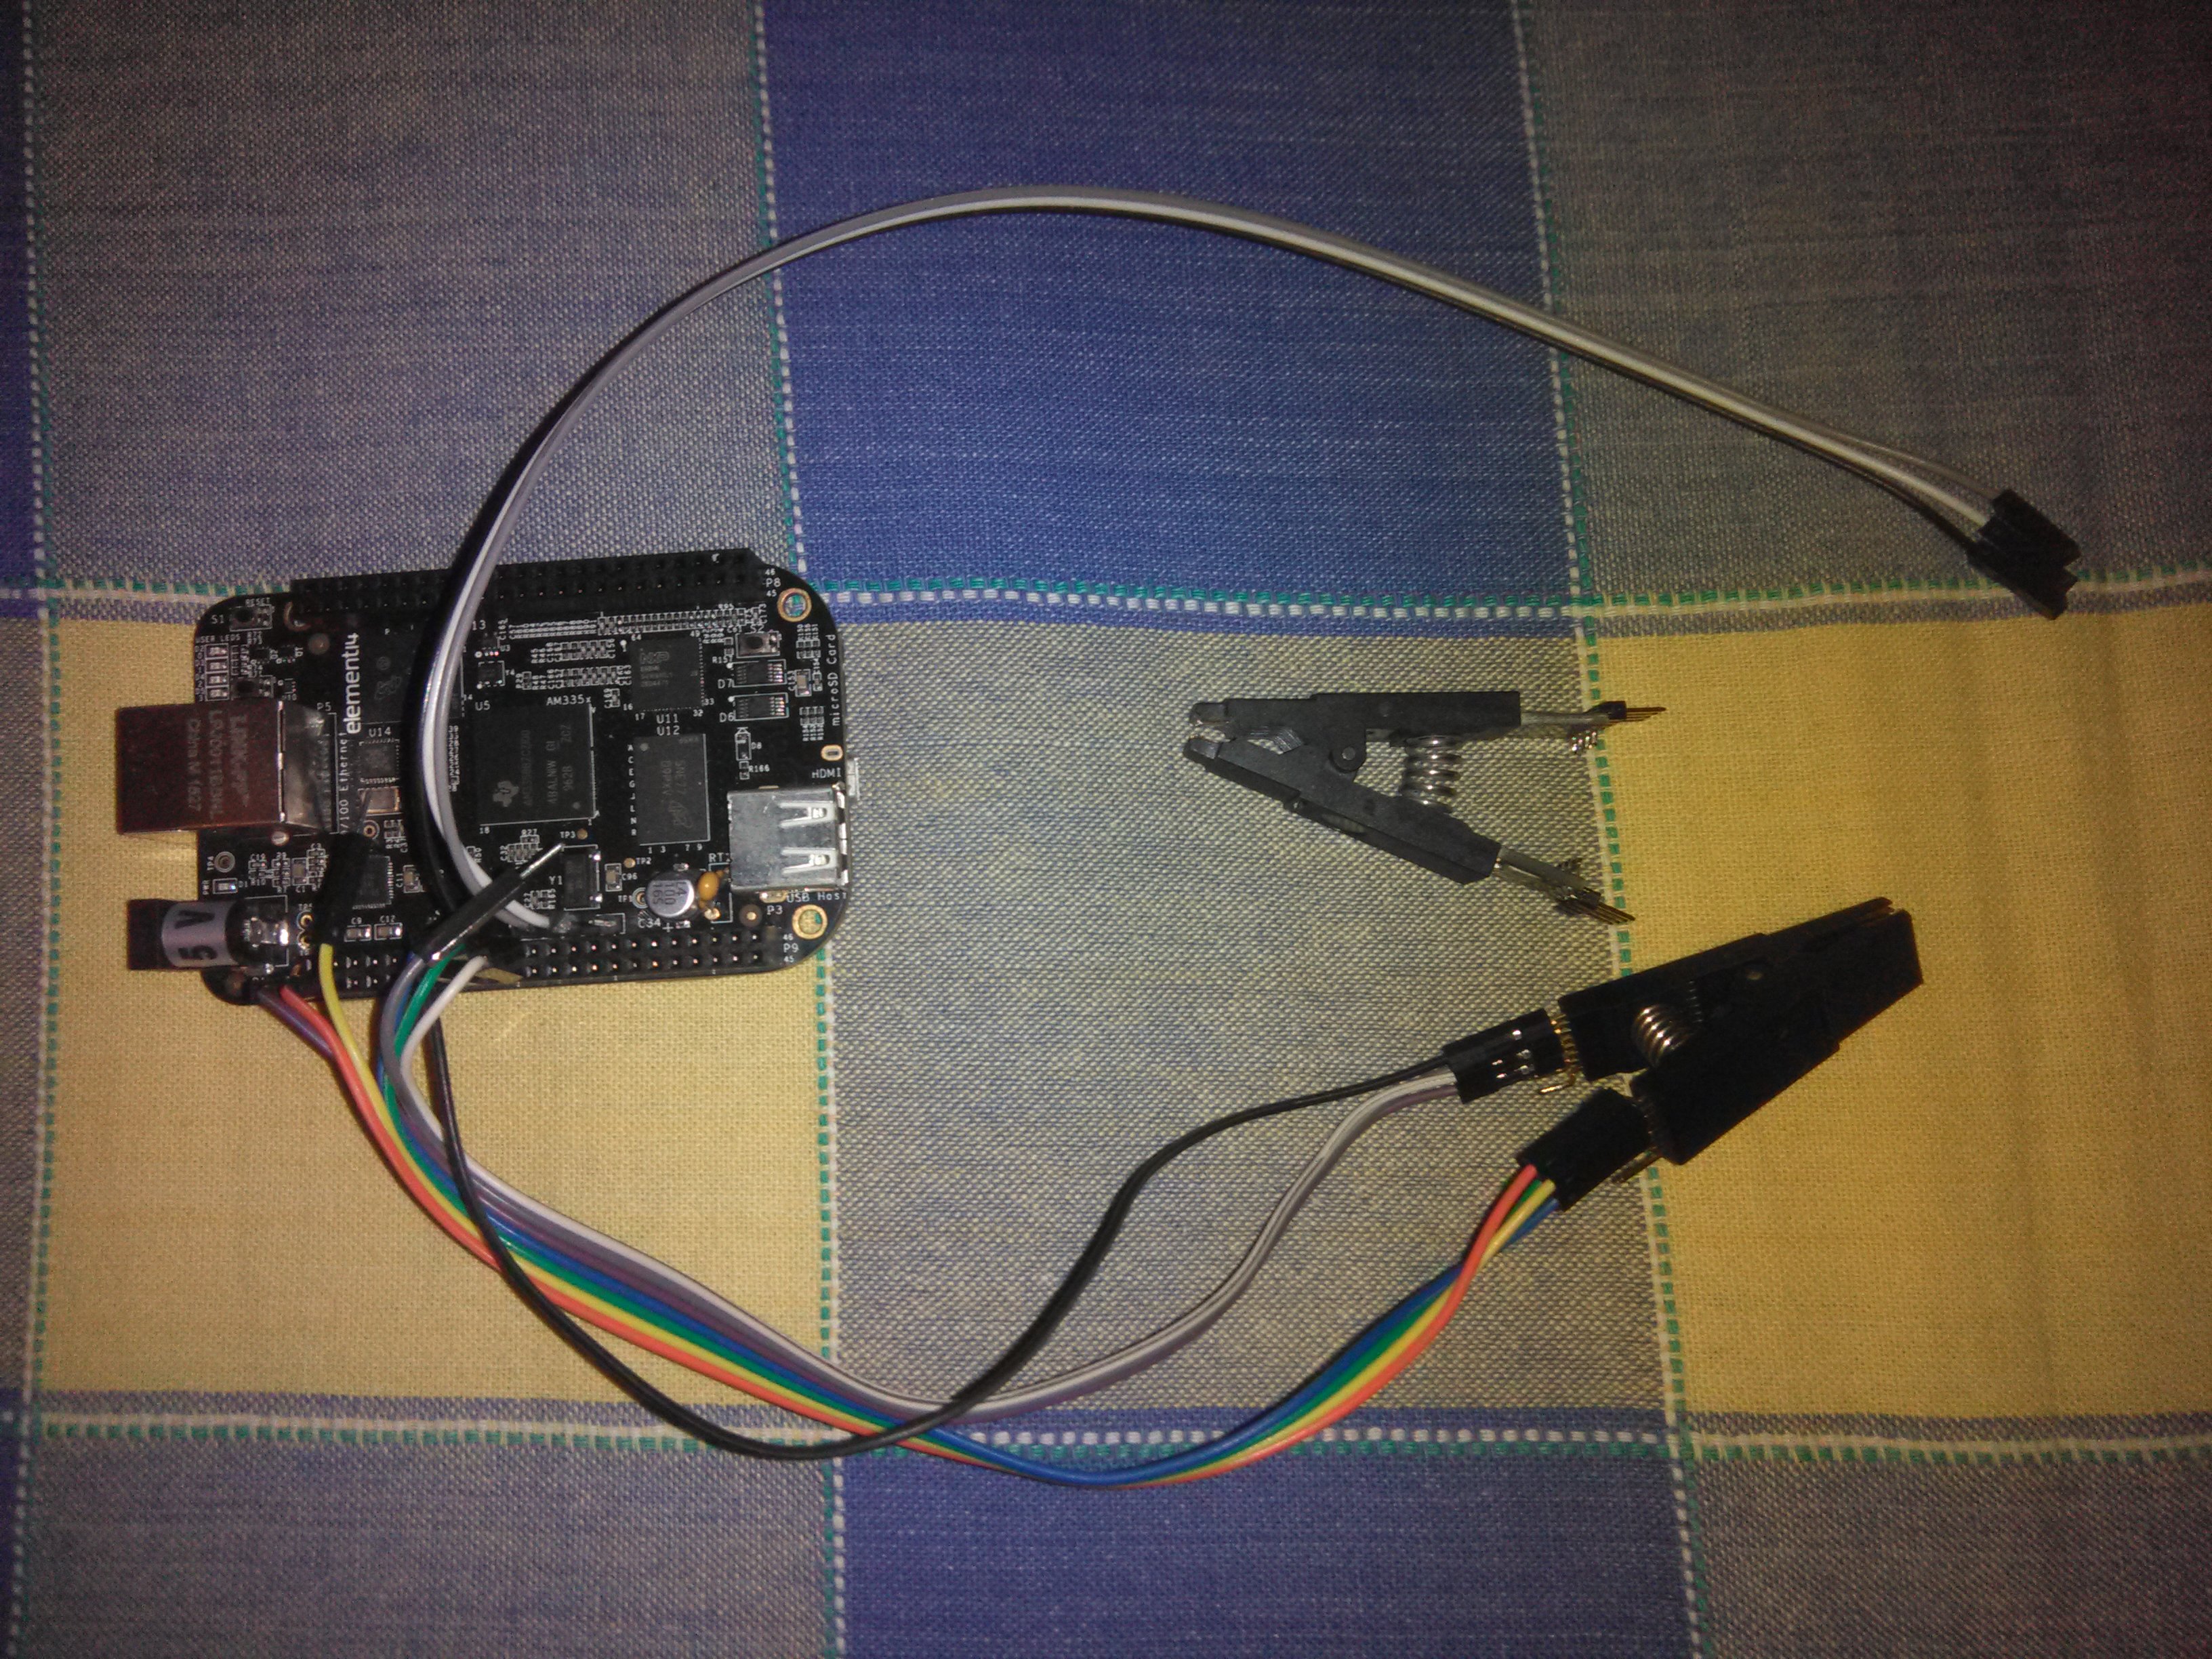 bbb_with_soic16_clip_and_ttl_cable.jpg